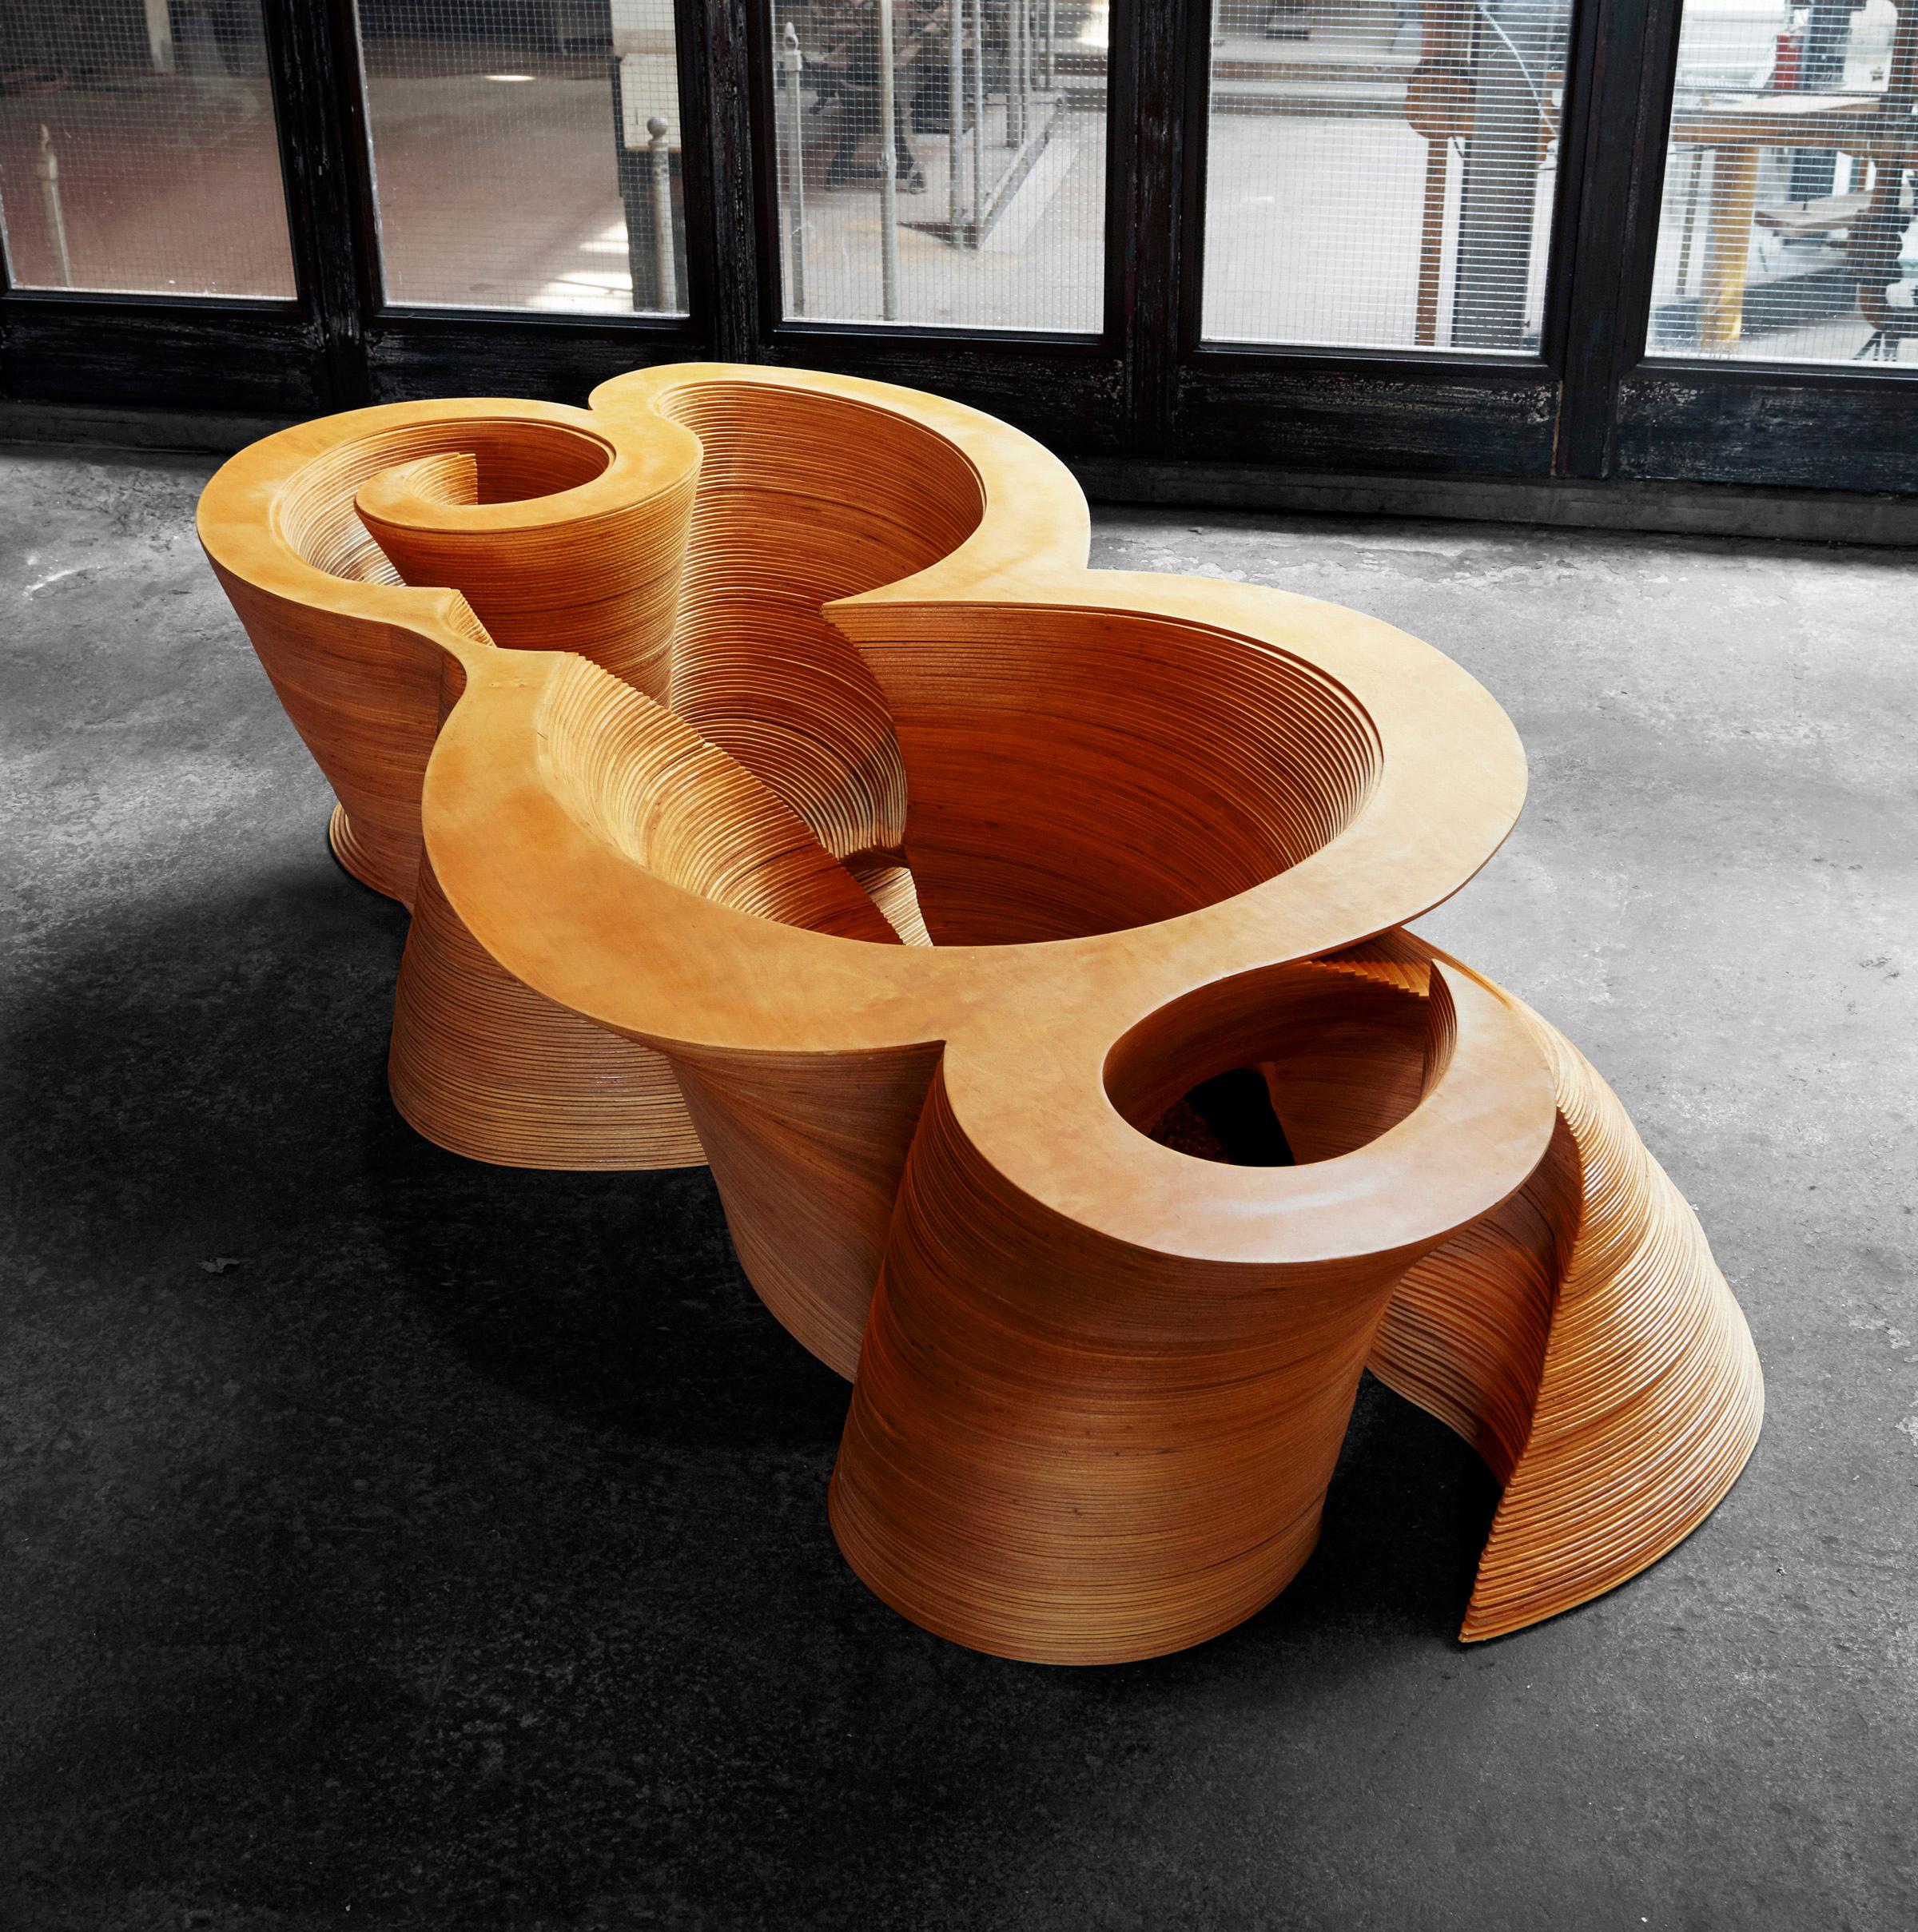 American Luxury Organic Modern Coffee Table, Furniture Sculpture, High End Wood Art For Sale